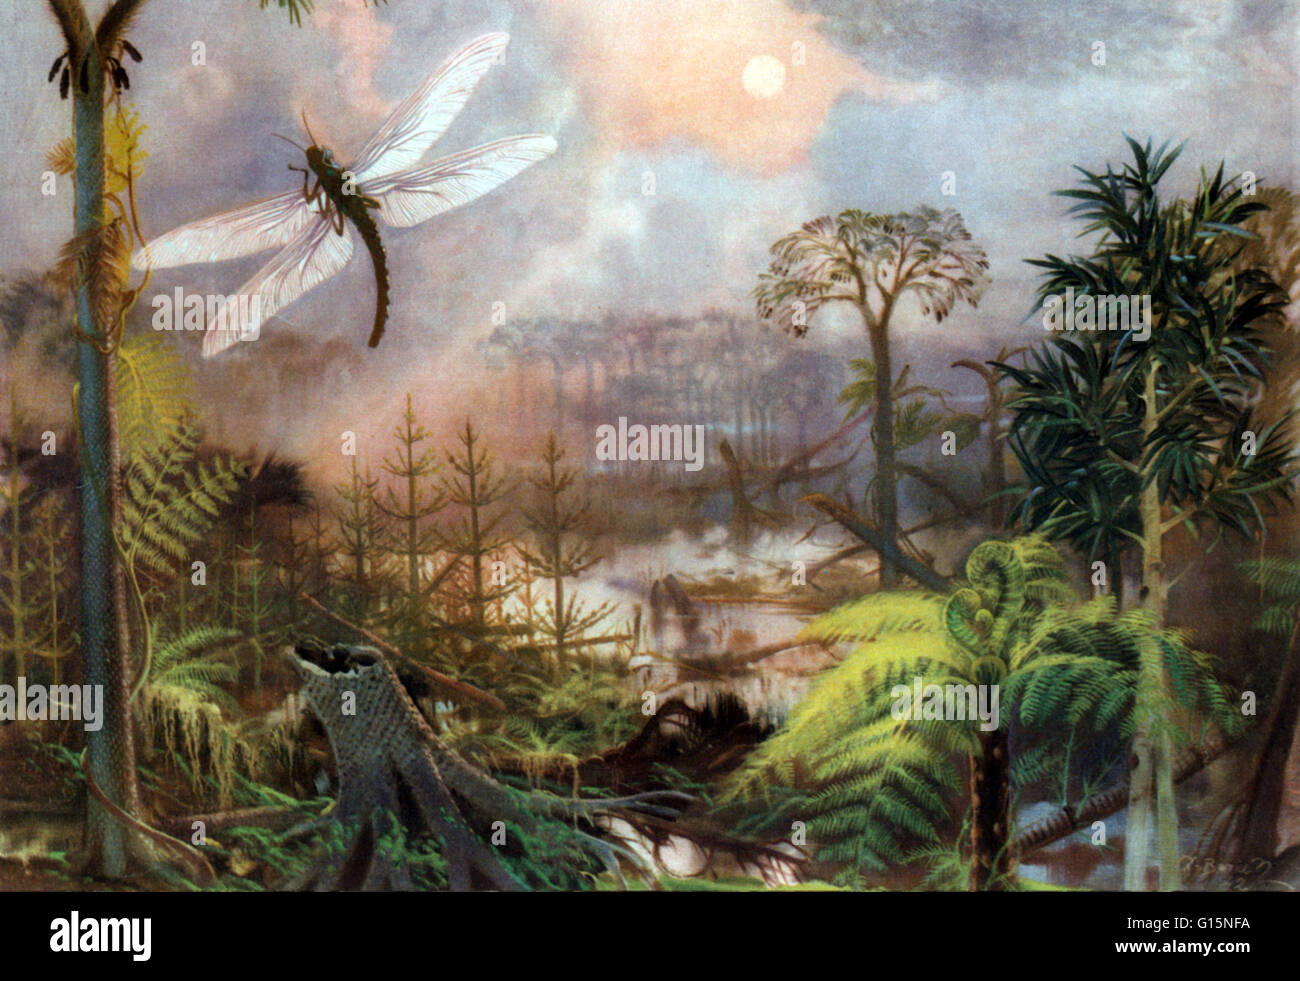 Meganeura is a genus of extinct insects from the Carboniferous period, which resembled and are related to the present day dragonflies. Meganeura were predatory, and fed on other insects, and even small amphibians. Carboniferous is the fifth period of the Stock Photo